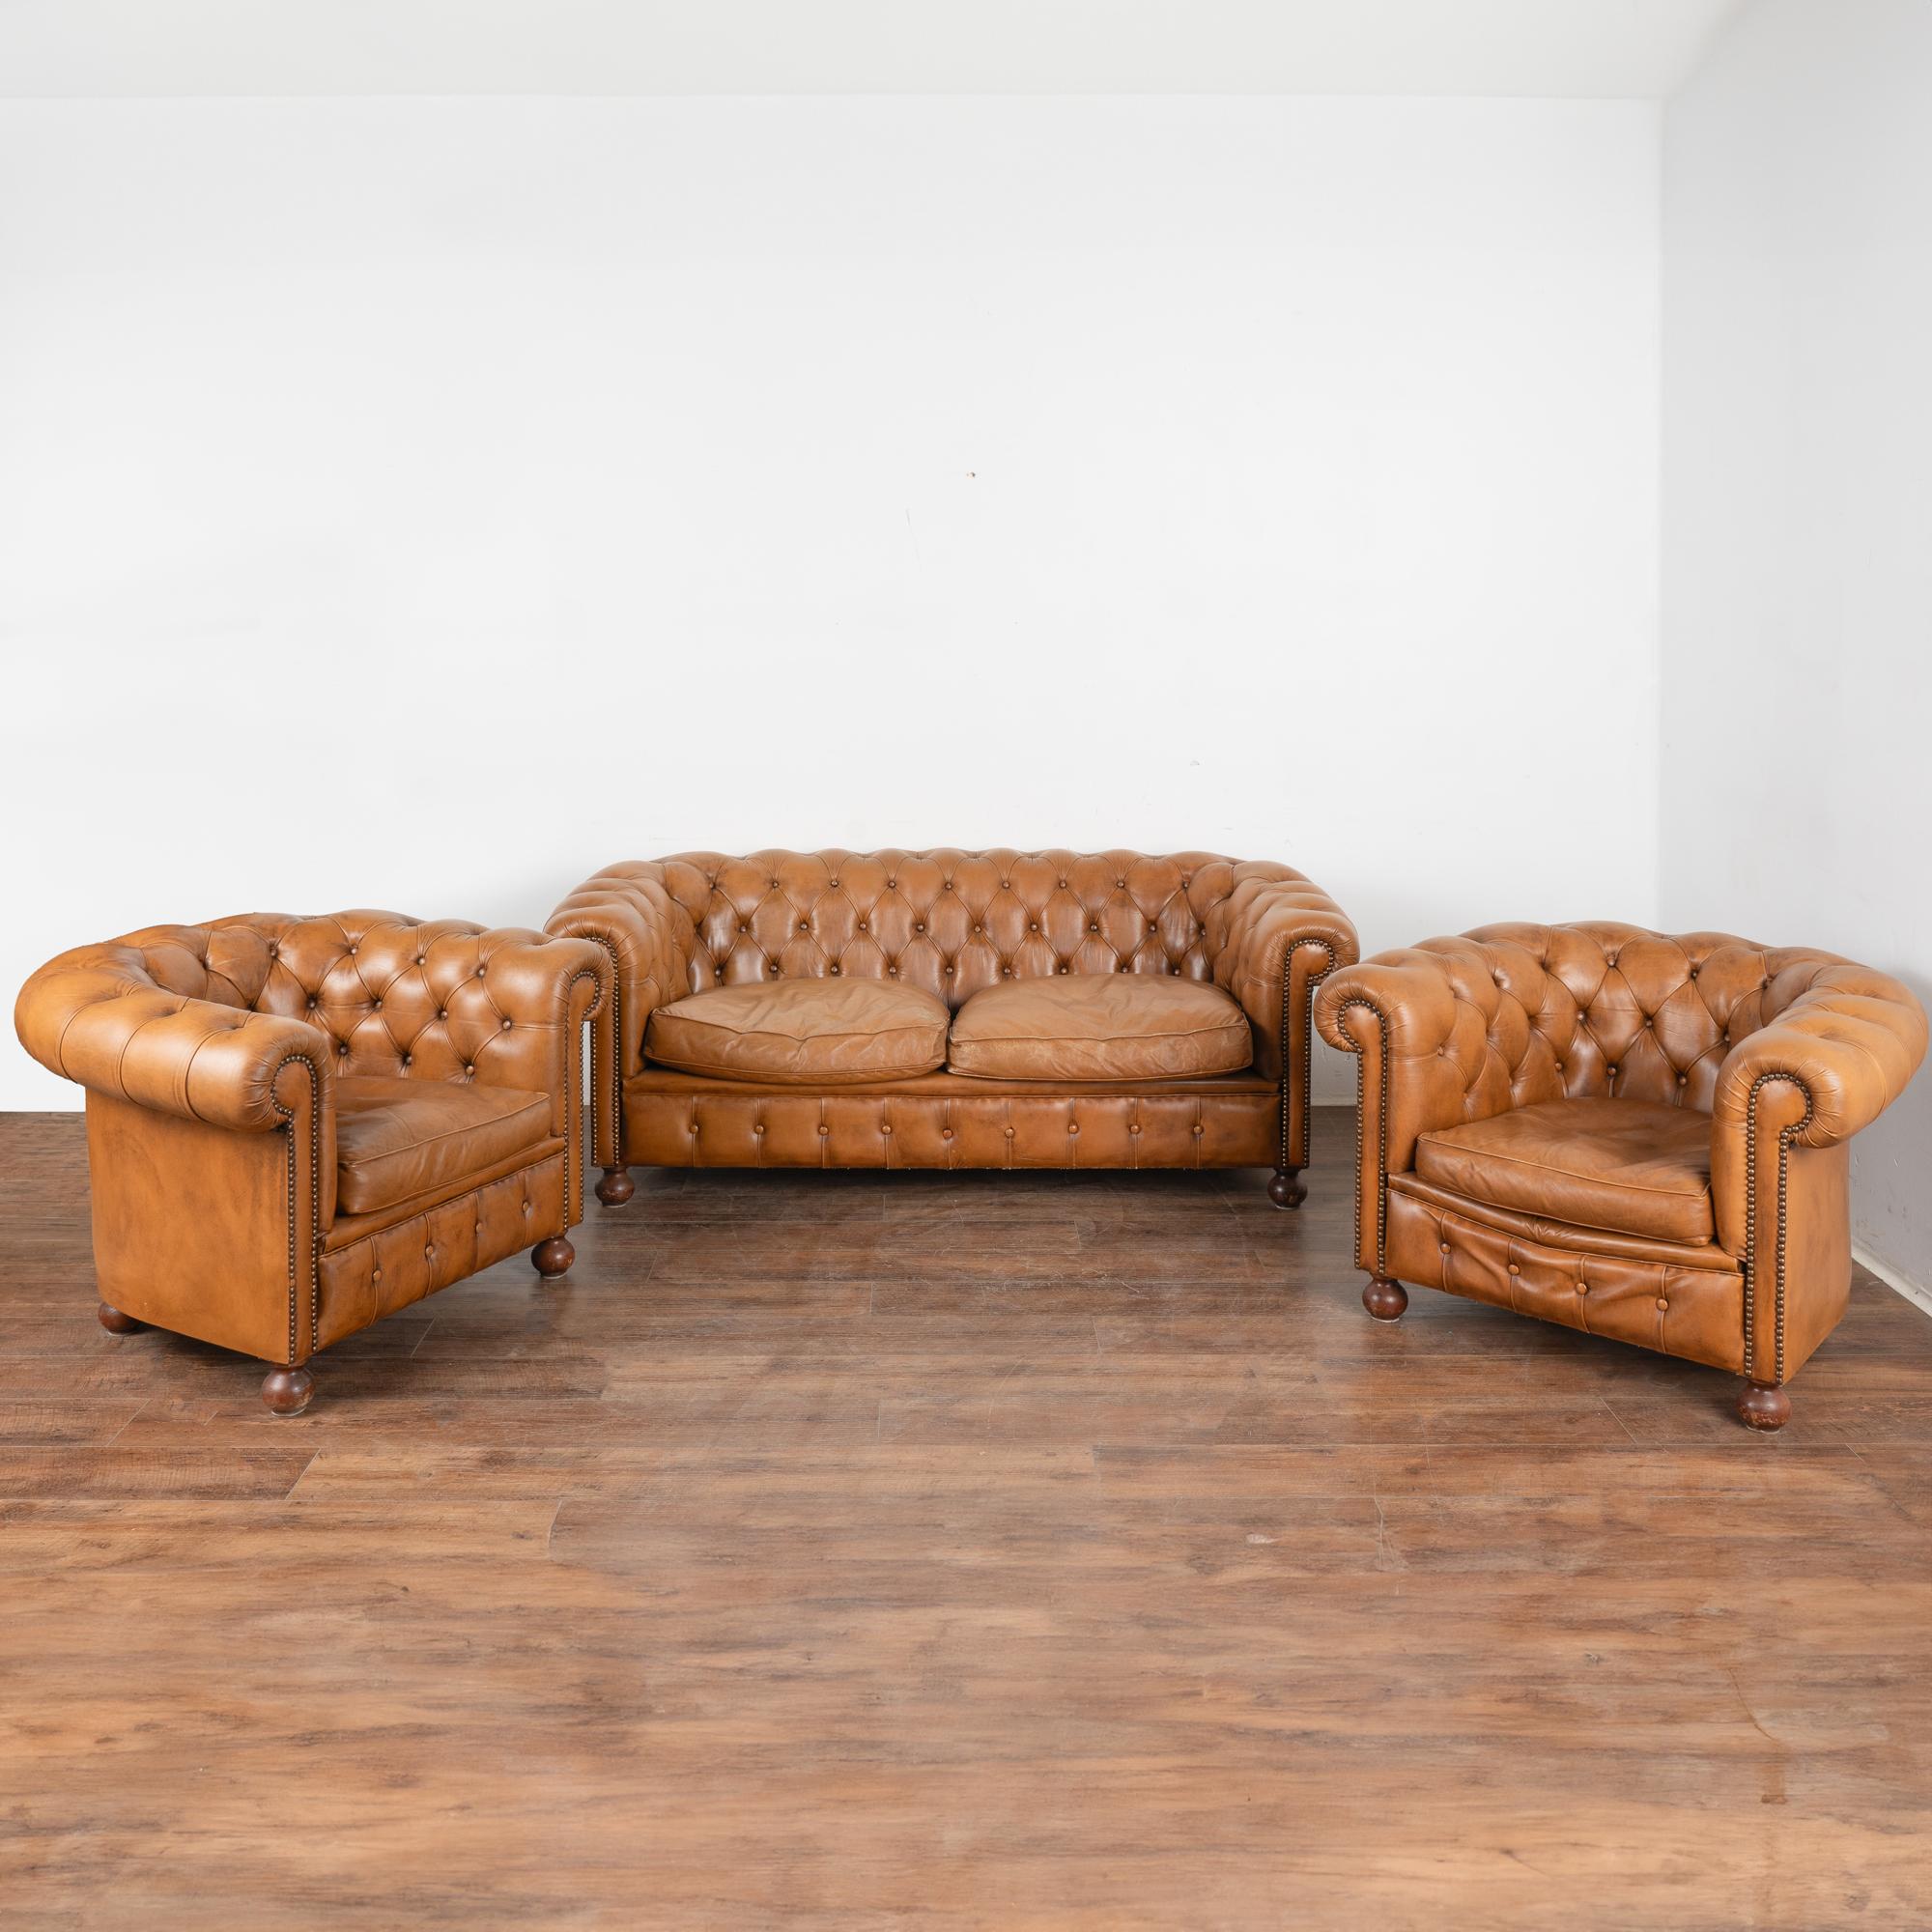 Set (3) vintage leather Chesterfield style 2-seat sofa and pair of club arm chairs.
The camel brown leather has traditional tufted buttoned accents, rolled arms, nail head trim, and hard wood bun feet.
Sold in used vintage condition. Cushions have